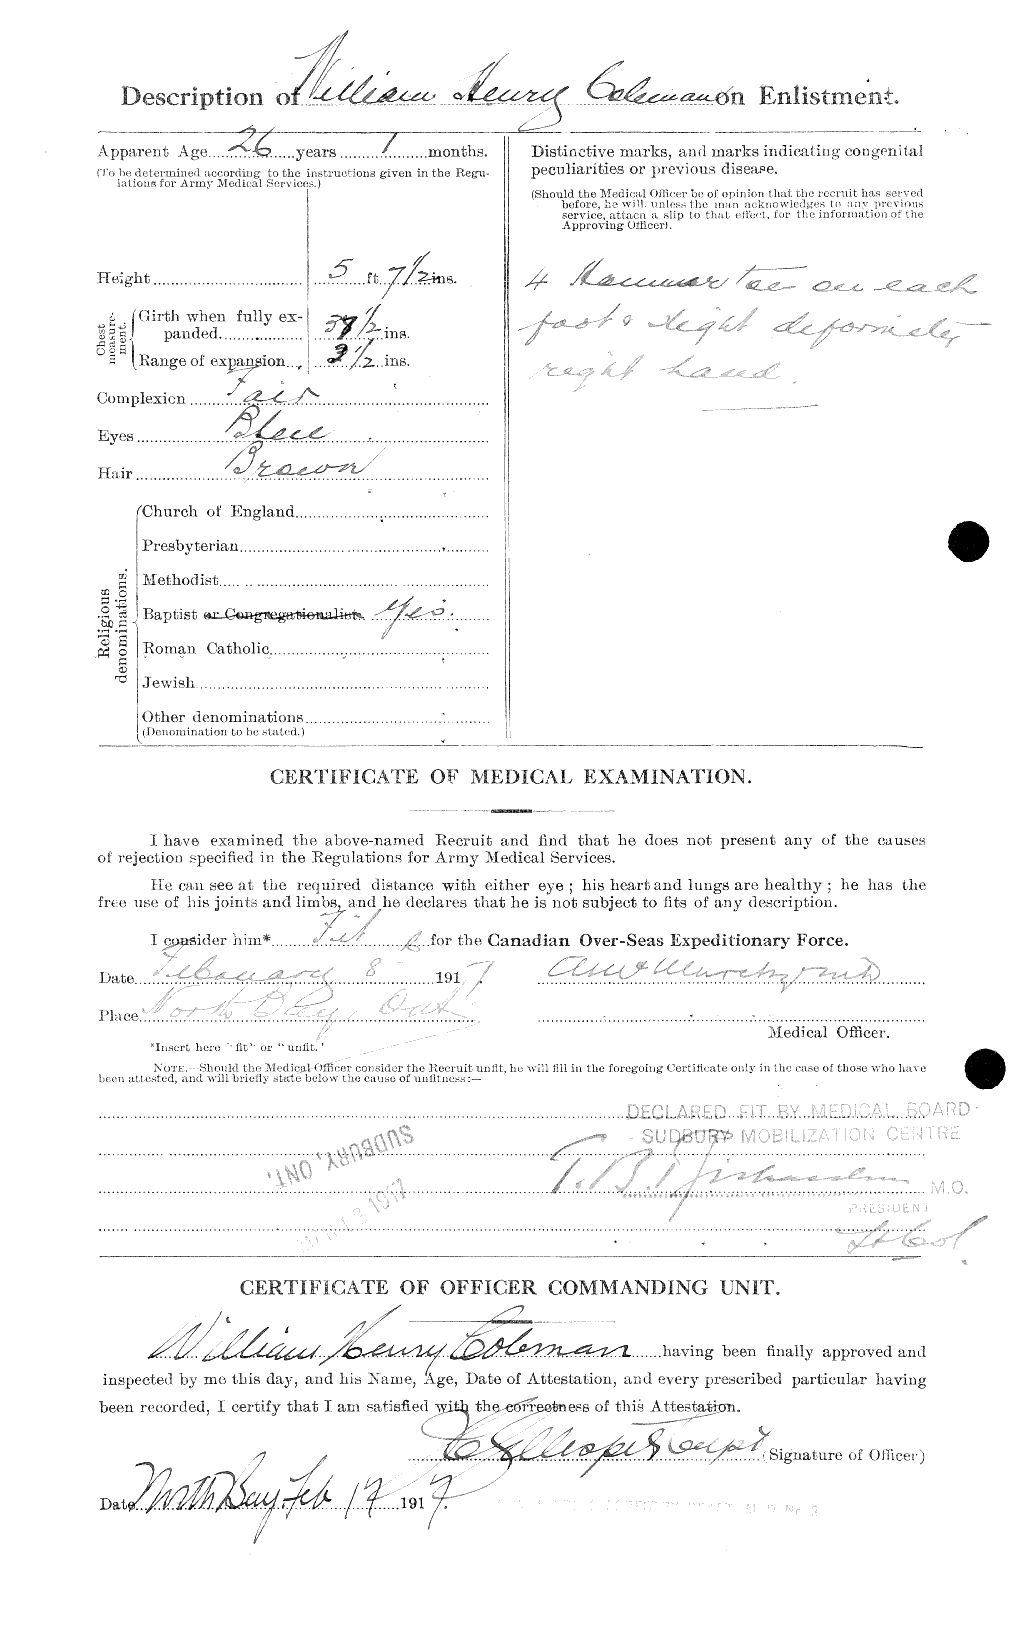 Personnel Records of the First World War - CEF 028315b